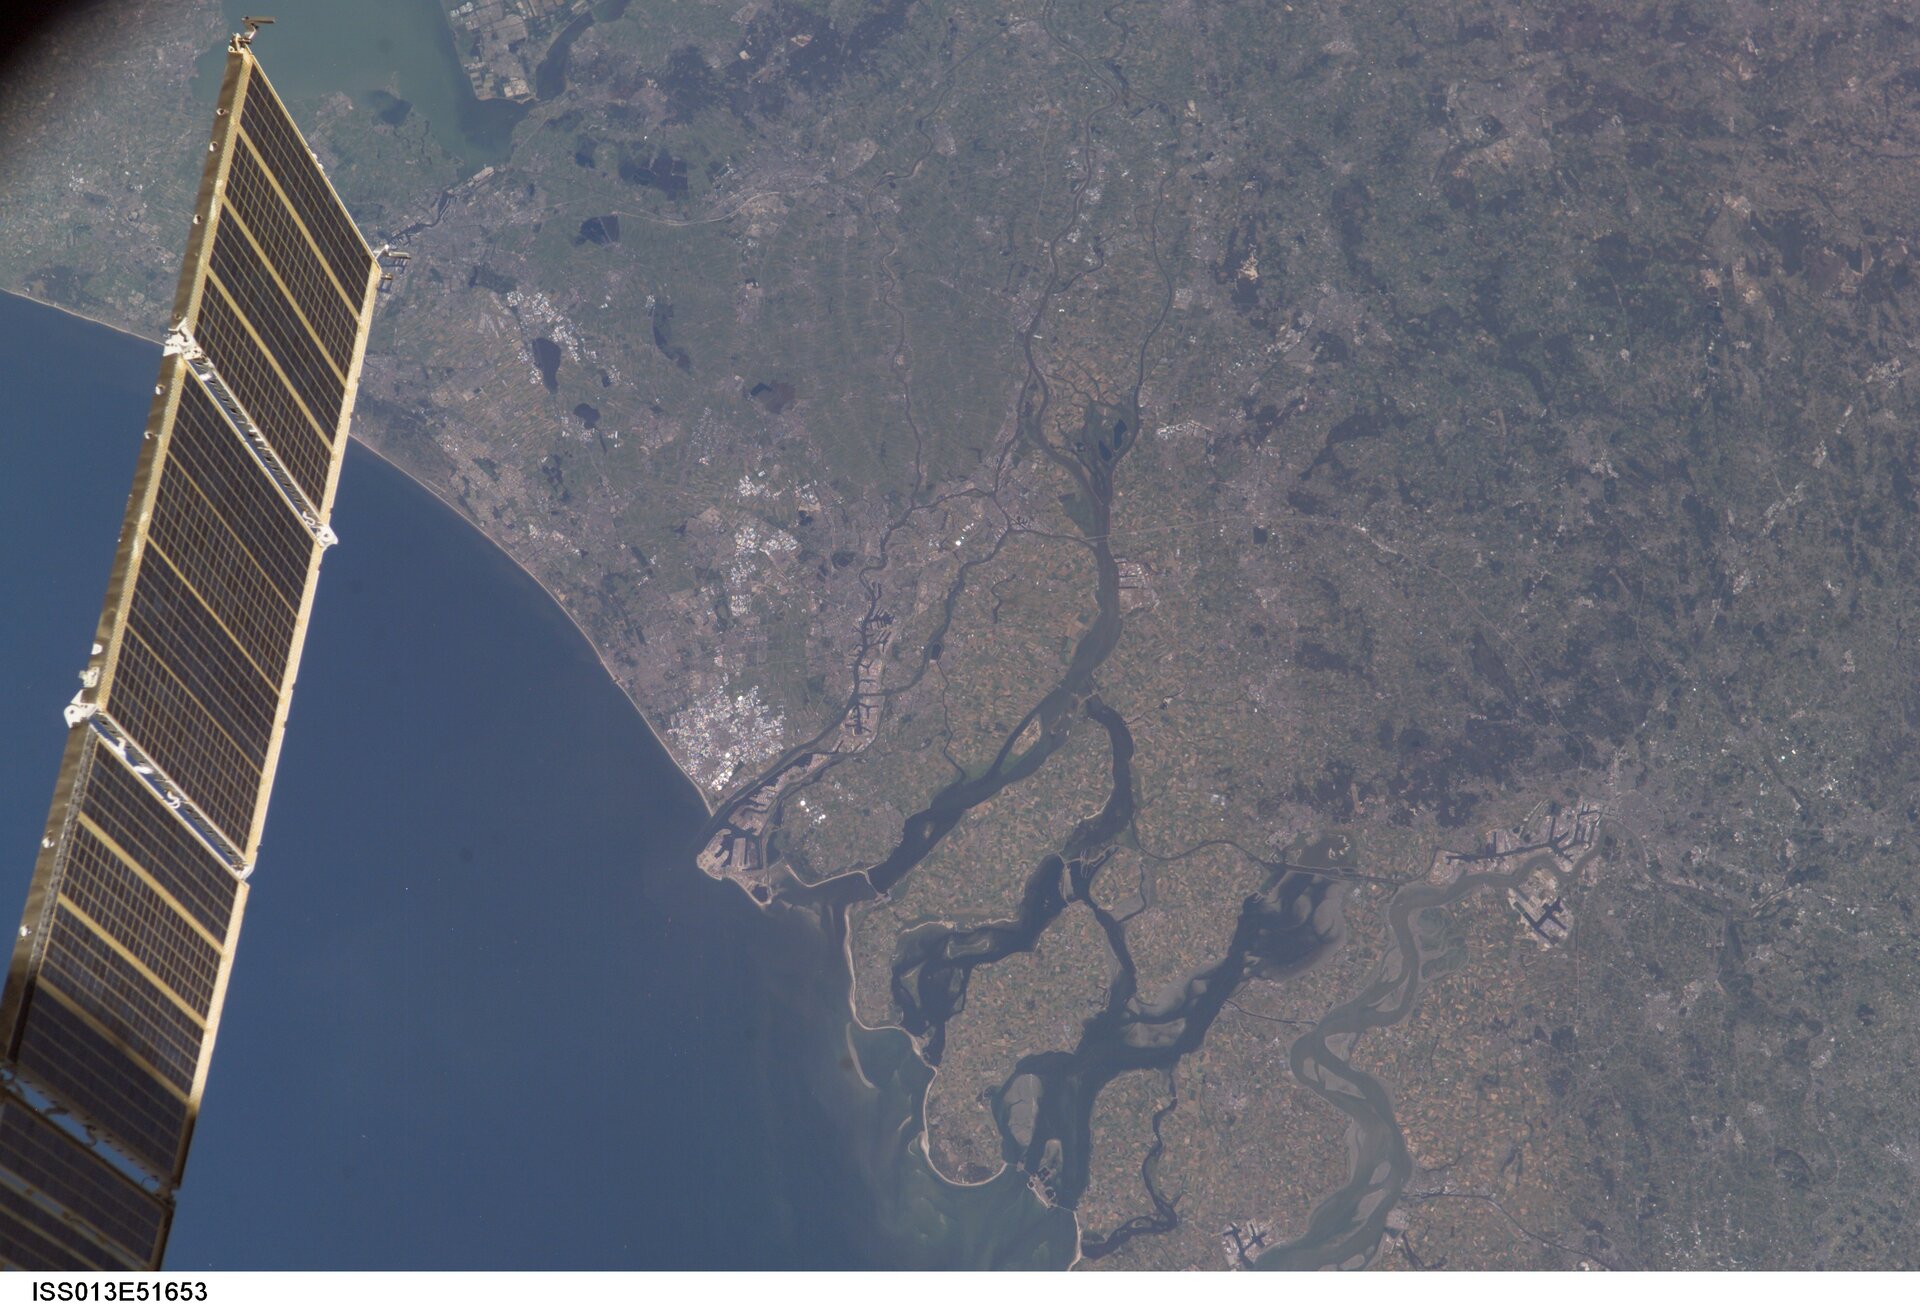 The west coast of the Netherlands seen from the International Space Station